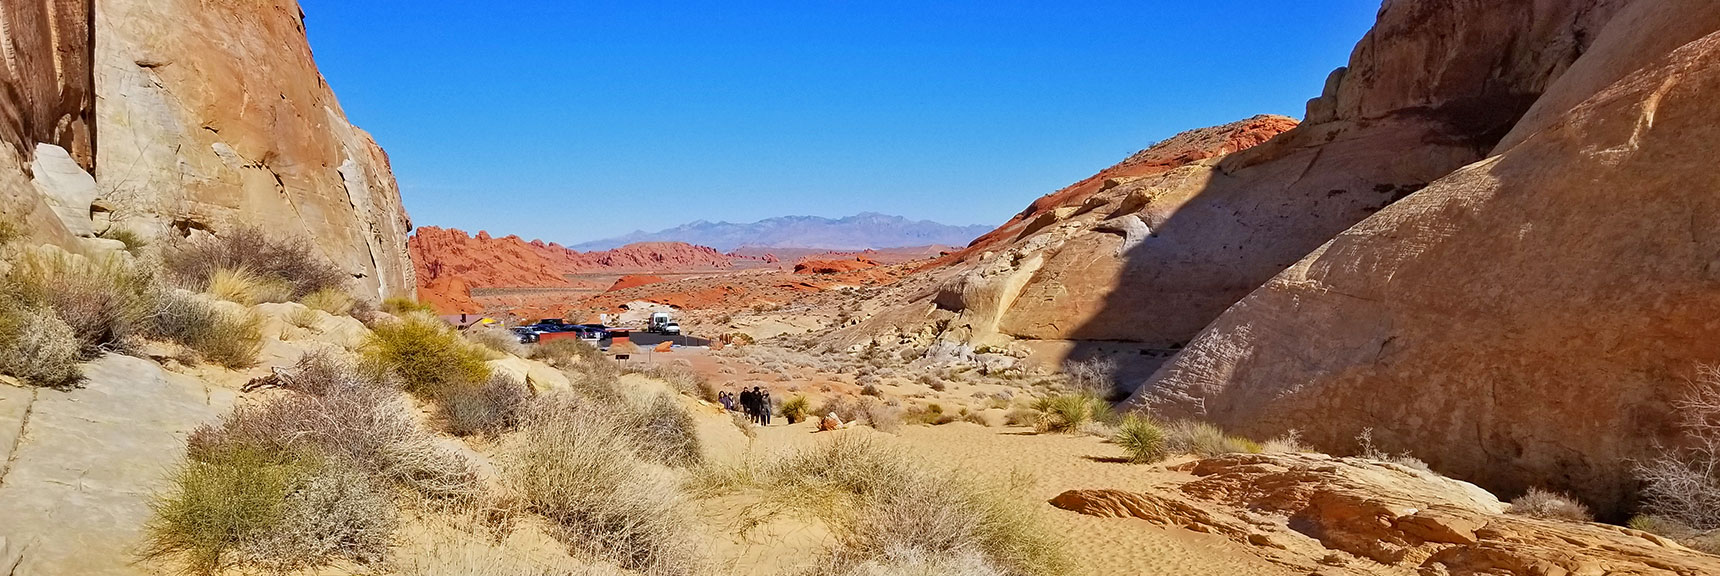 Looking Back Toward the Trailhead for White Domes Loop Trail in Valley of Fire State Park, Nevada